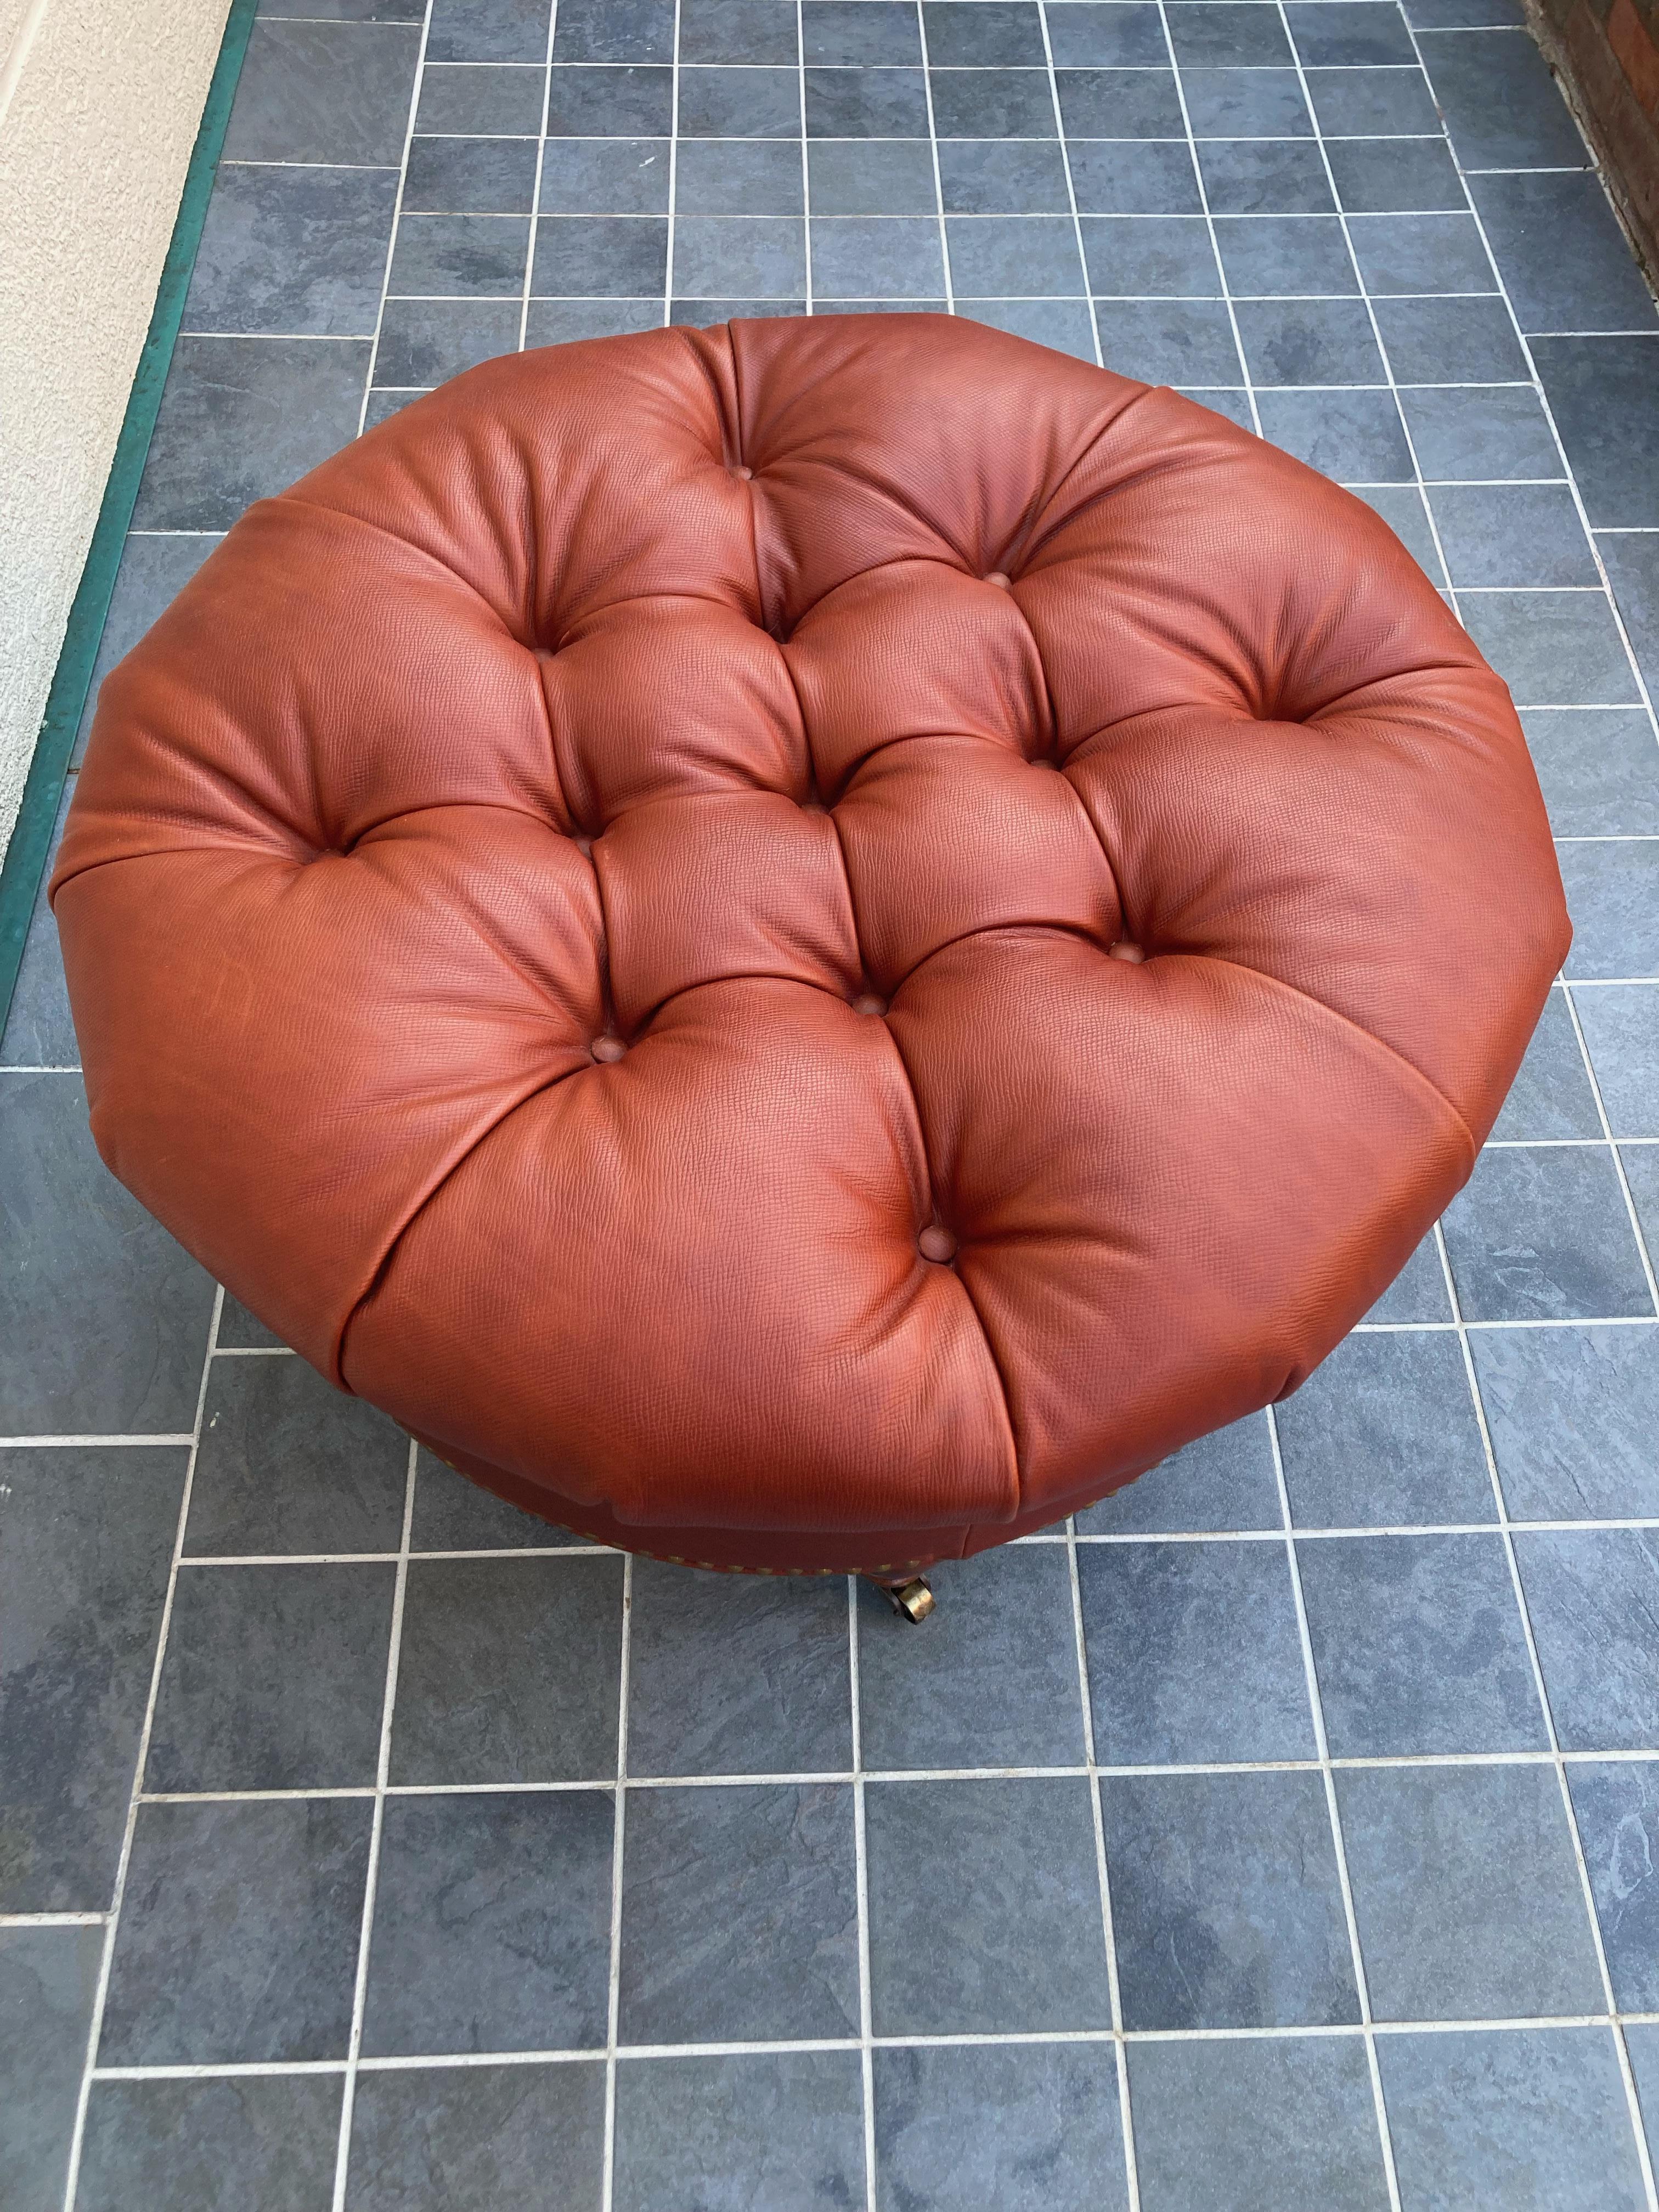 Striking Edward Ferrell and Lewis Mittman tufted terracotta red textured leather round coffee table ottoman having turned mahogany feet terminating in brass casters. Brass nailheads are a handsome finishing touch. This was custom purchased through a